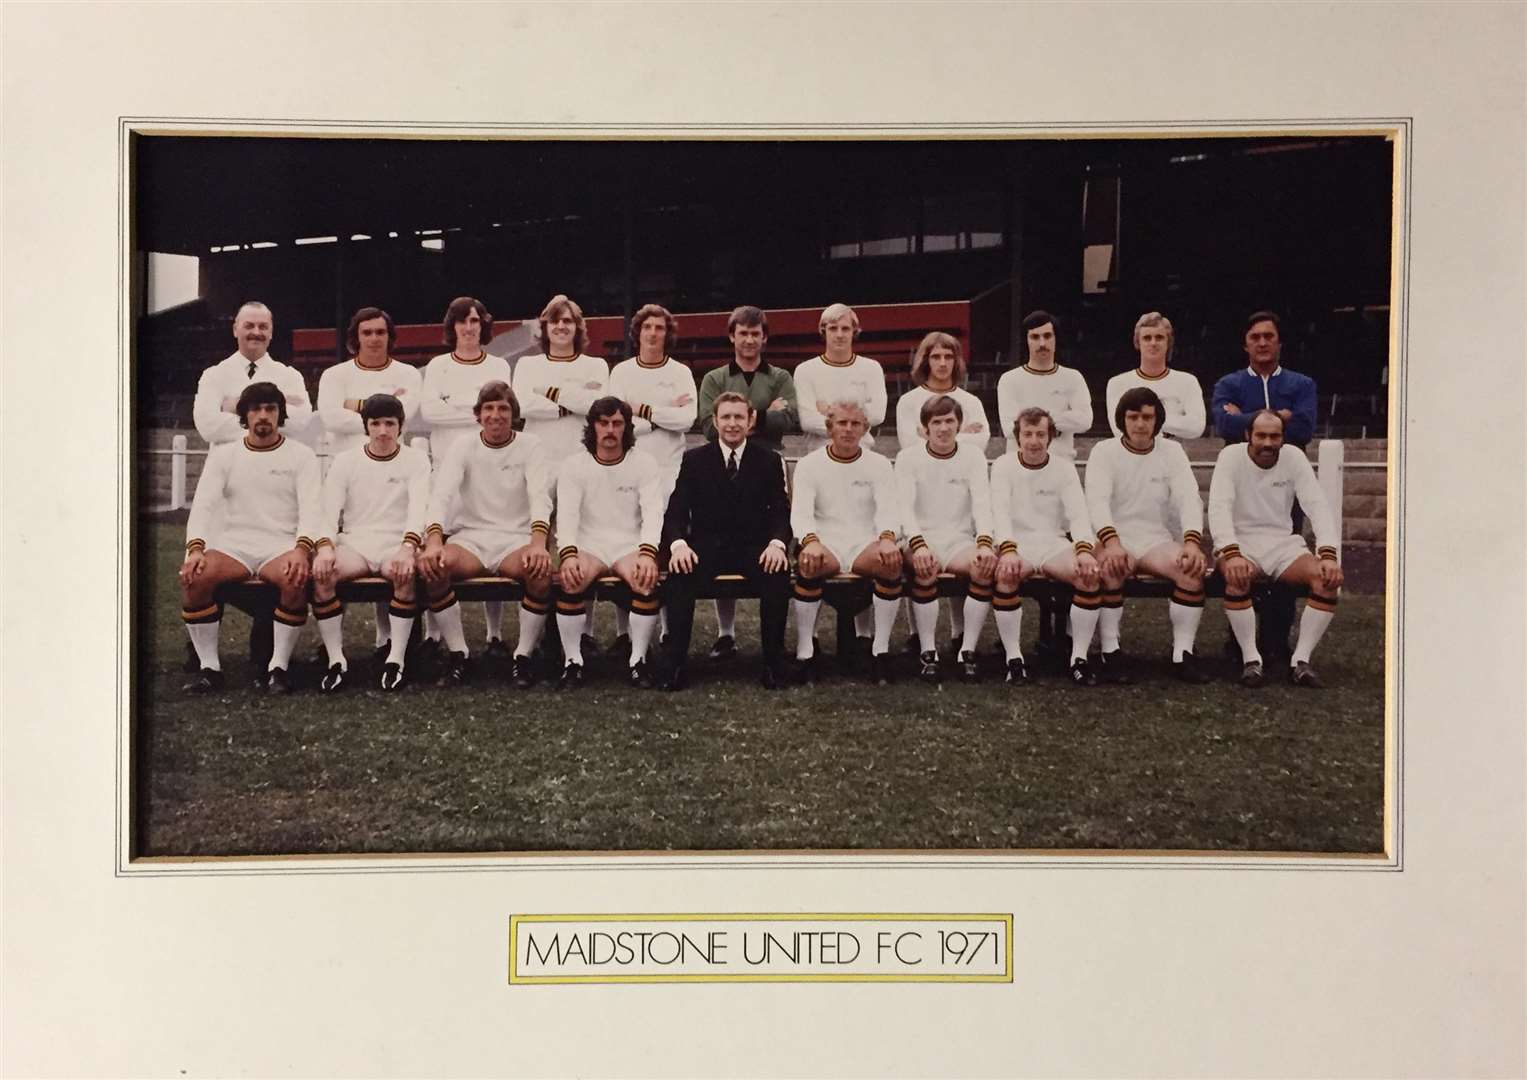 The official club portrait of the Maidstone United side in 1971 is one of many items that will be on display. Former England manager Roy Hodgson is among the squad, pictured in the back row, fifth from left